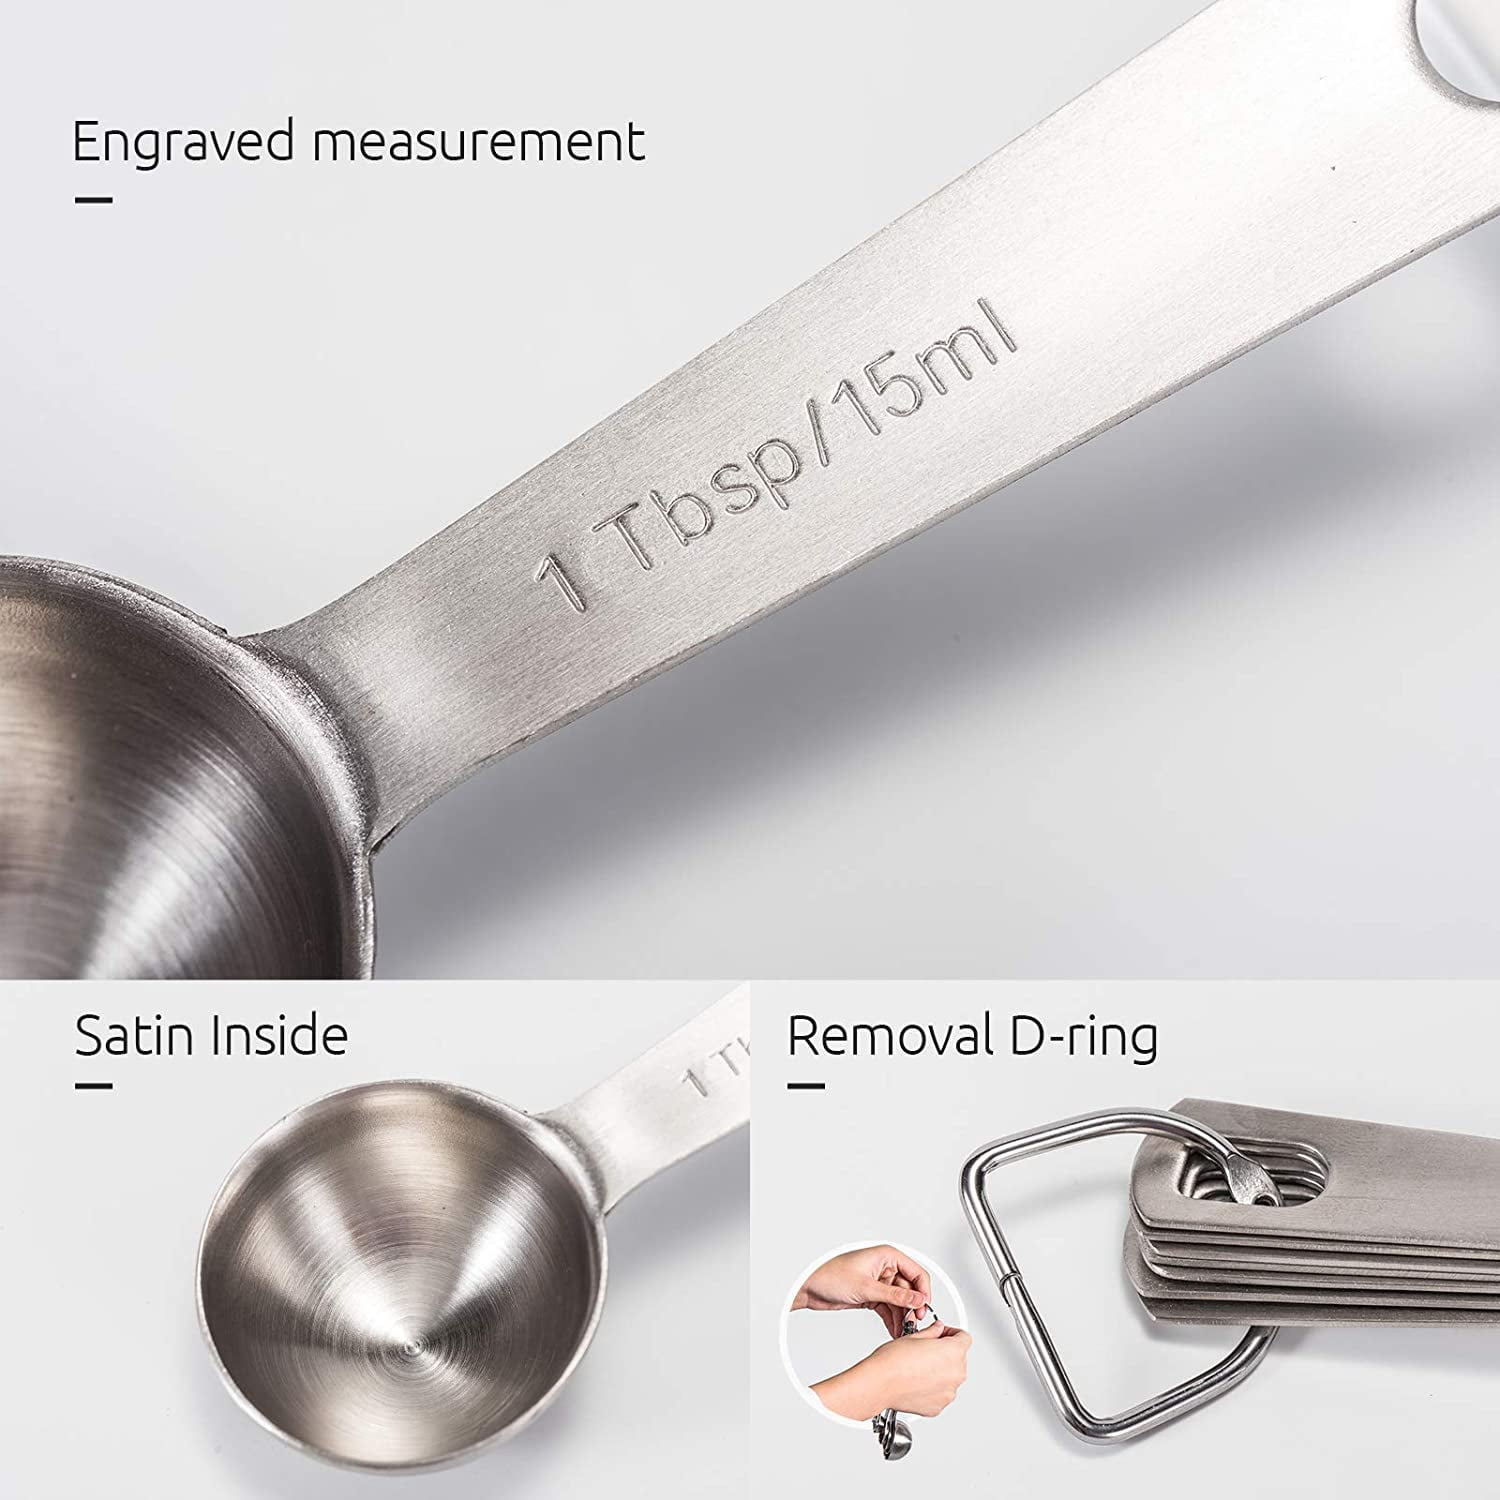 7 Measuring Cups and 7 Measuring Spoons with 2 D-Rings and 1 Professional Magnetic Measurement Conversion Chart U-Taste Measuring Cups and Spoons Set of 15 in 18/8 Stainless Steel Measuring Cups